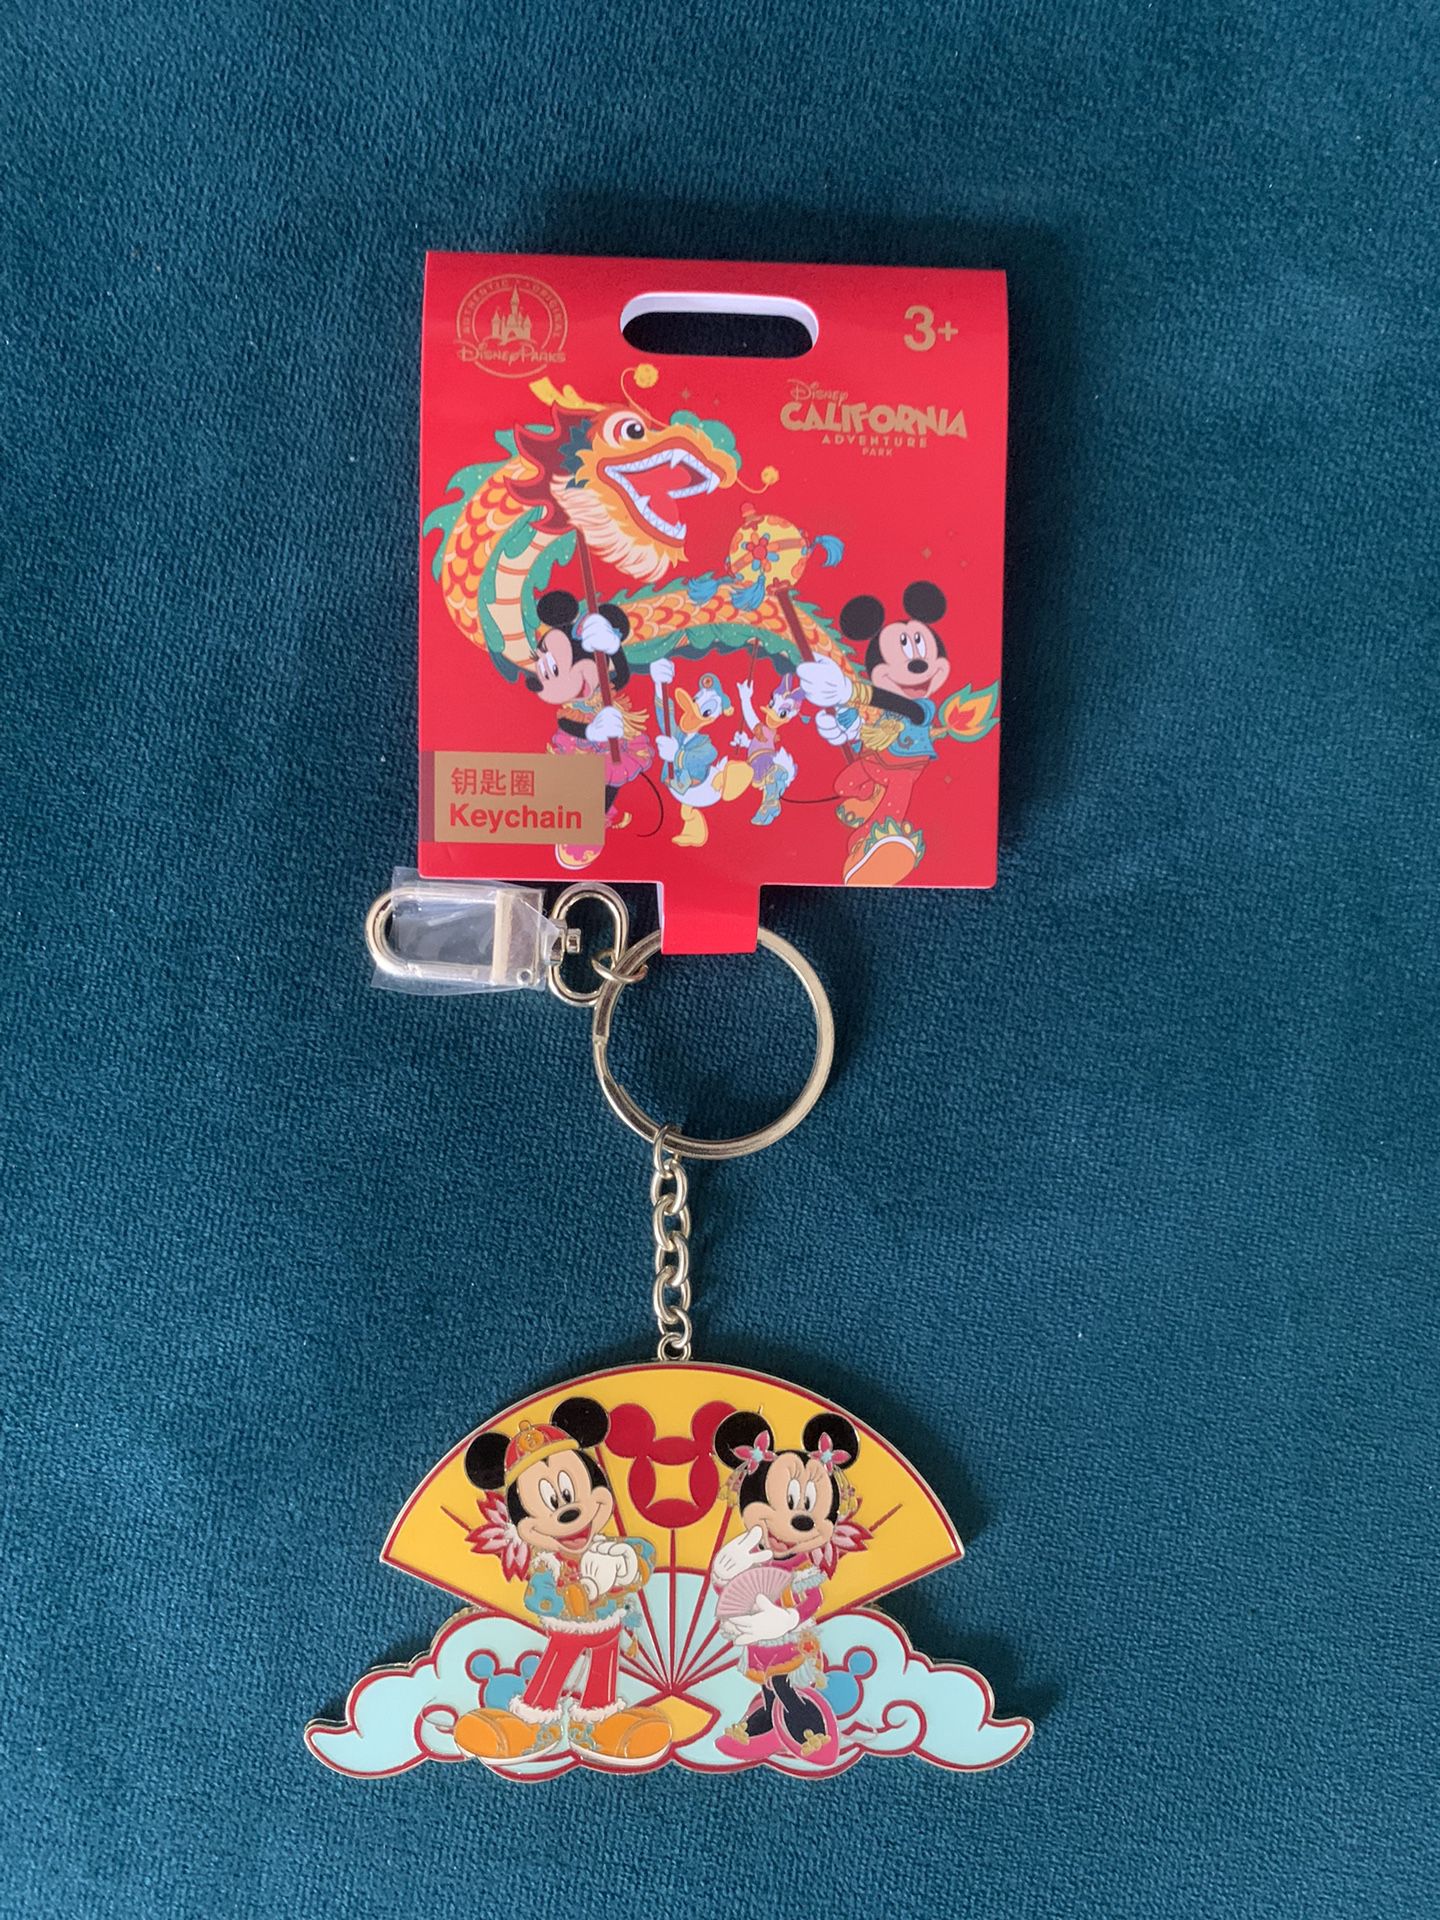 Disneyland DCA Chinese Lunar New Year 2020 Mickey Mouse